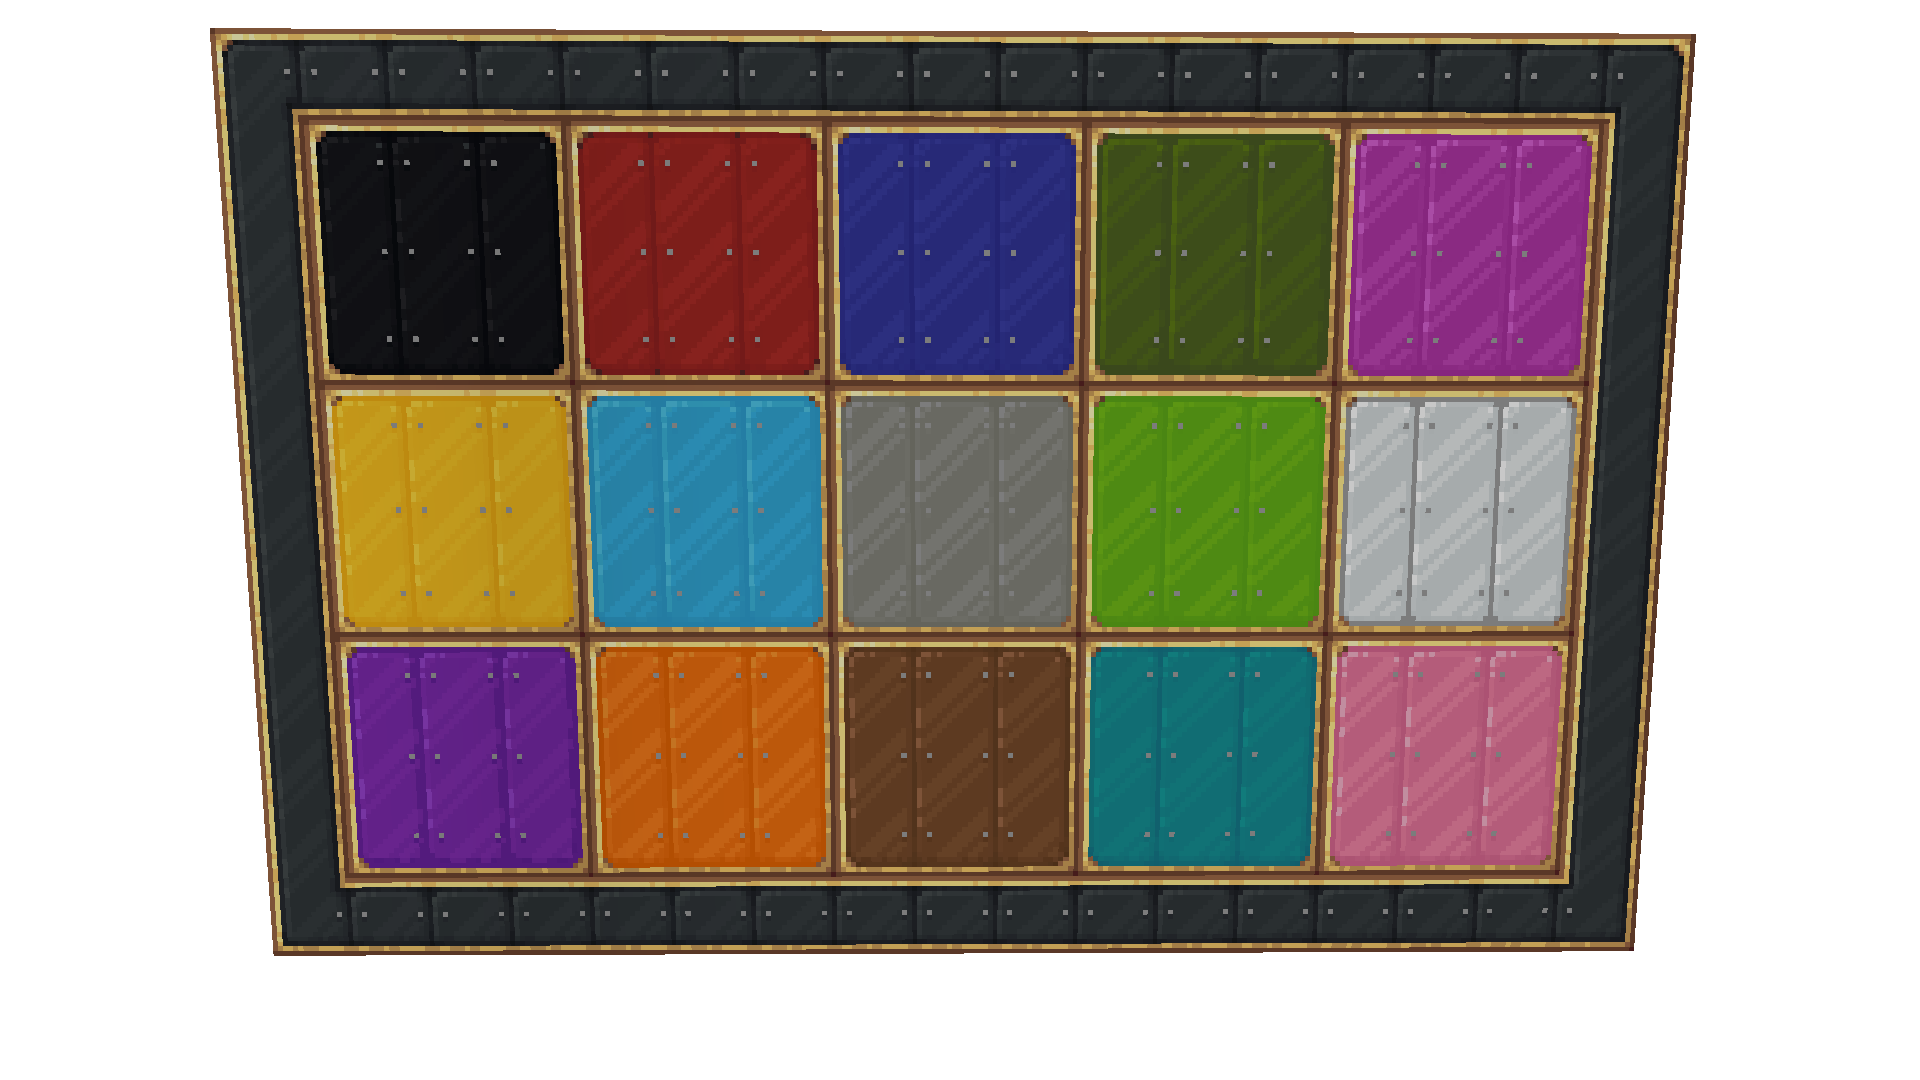 make block and item textures for your minecraft mod